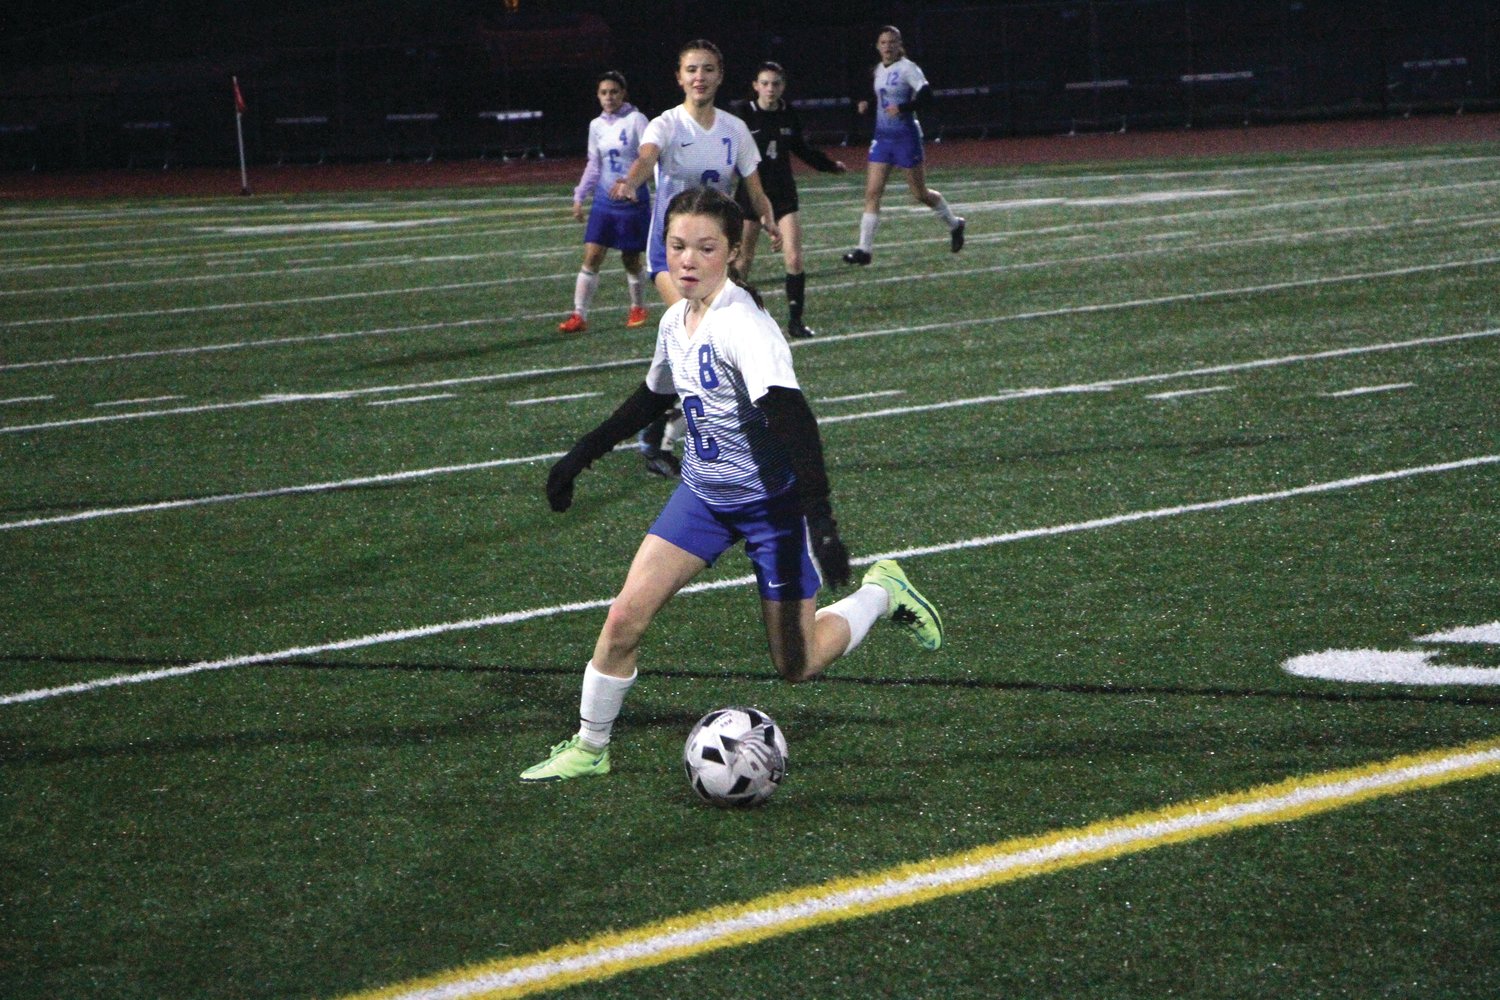 Rising junior midfielder Ava Shiflett dribbles onward in an away matchup against Klahowya Secondary School last year. Shiflett was a crucial part of EJ’s potent offense last year, linking passes from the backfield to Rivals scorers.